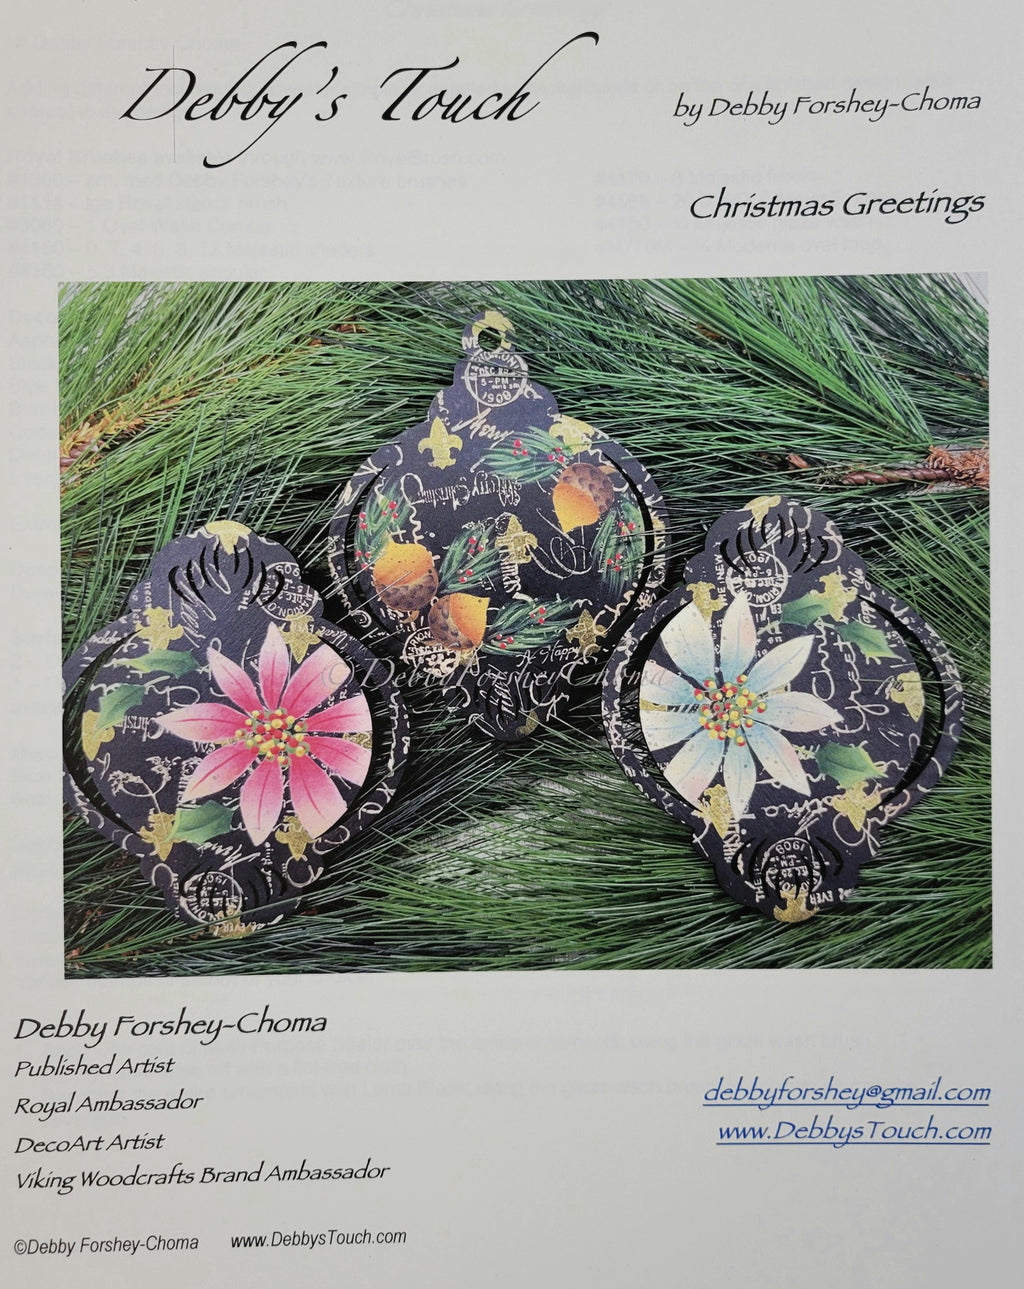 Christmas Greetings Packet by Debby Forshey-Choma